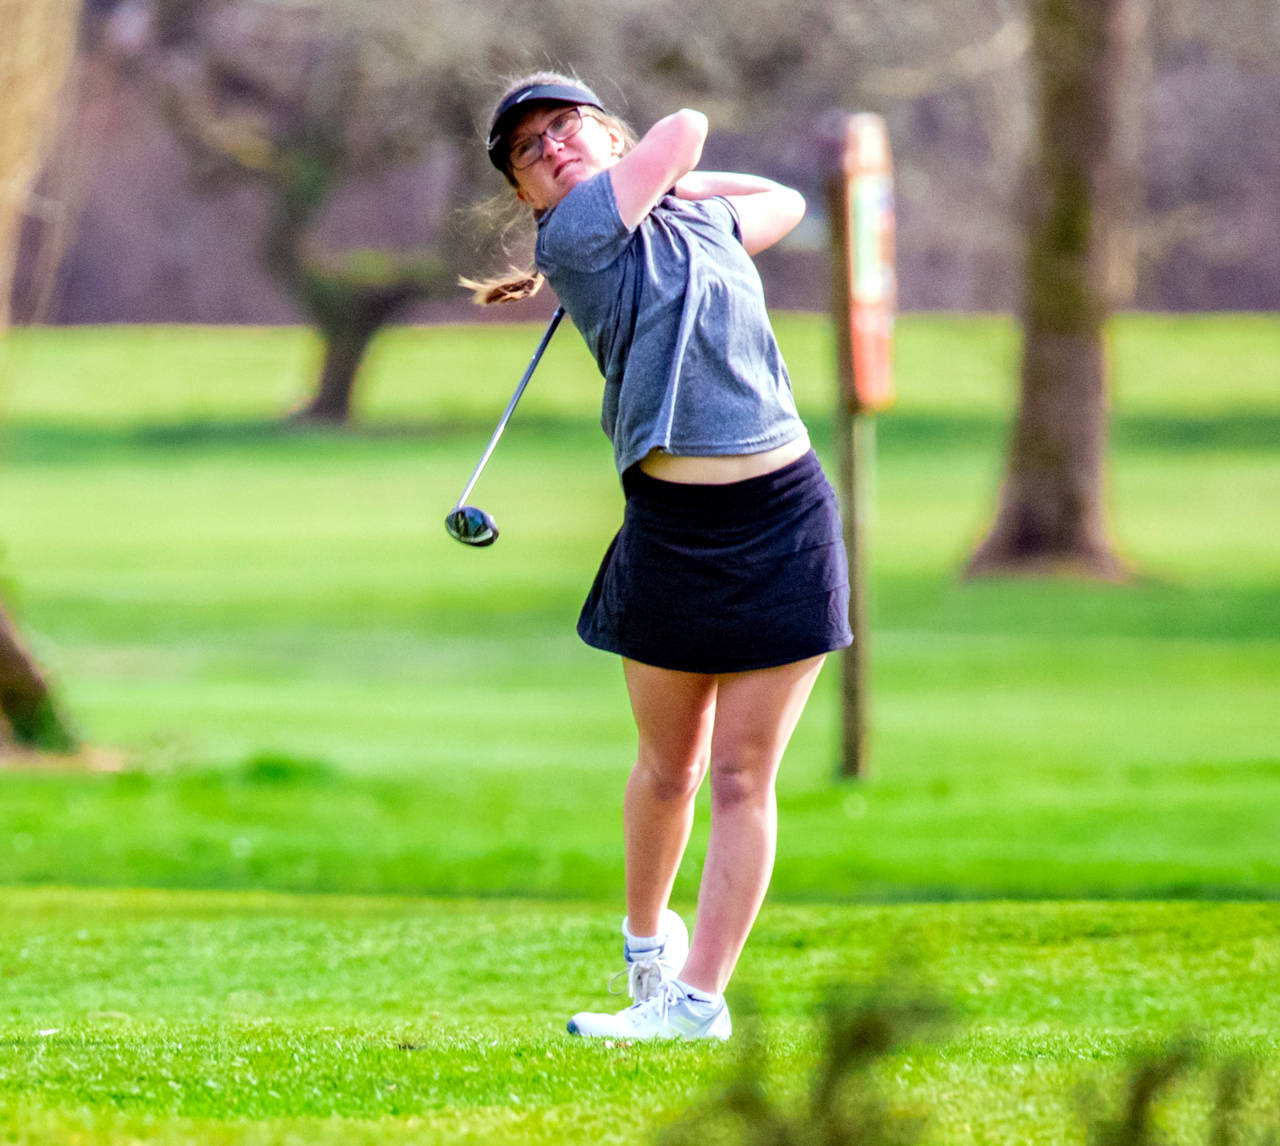 PHOTO BY SHAWN DONNELLY Montesano’s Hailey Blancas, seen here in a file photo, won a district title and led the Bulldogs to the team district championship at the 1A District 4 Championship Meet on Thursday at Oaksridge Golf Course in Elma.